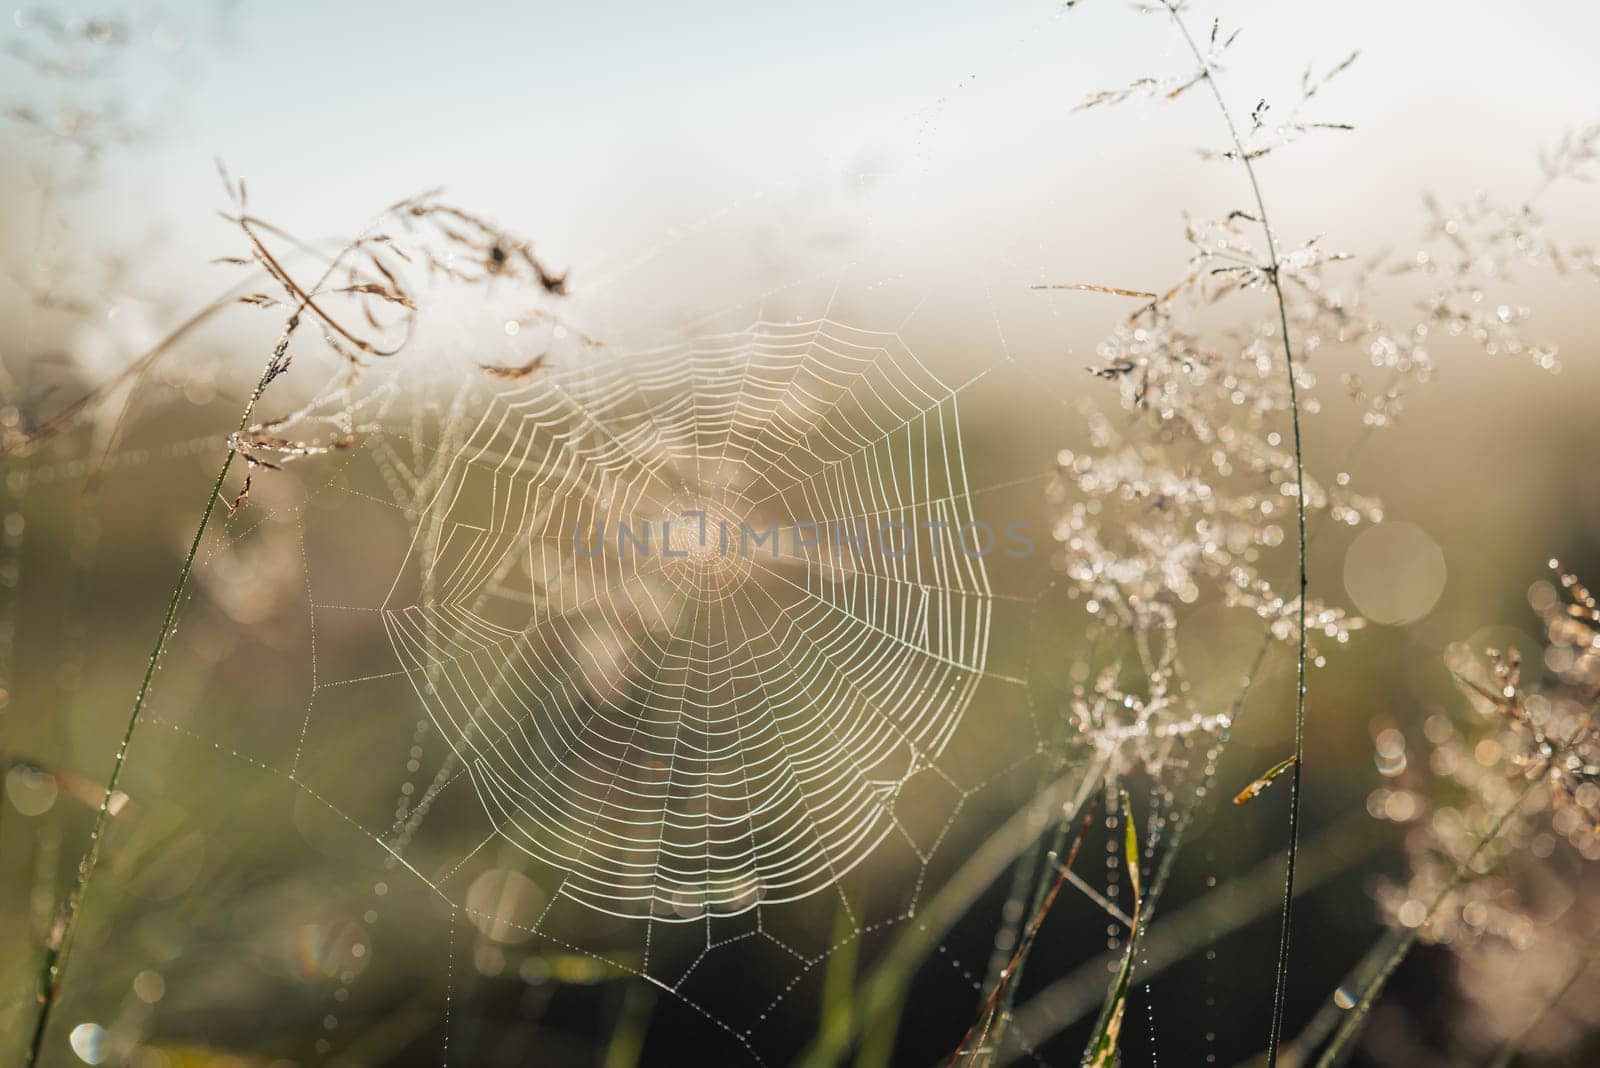 Spiders net in morning dew with mist in the background by VitaliiPetrushenko